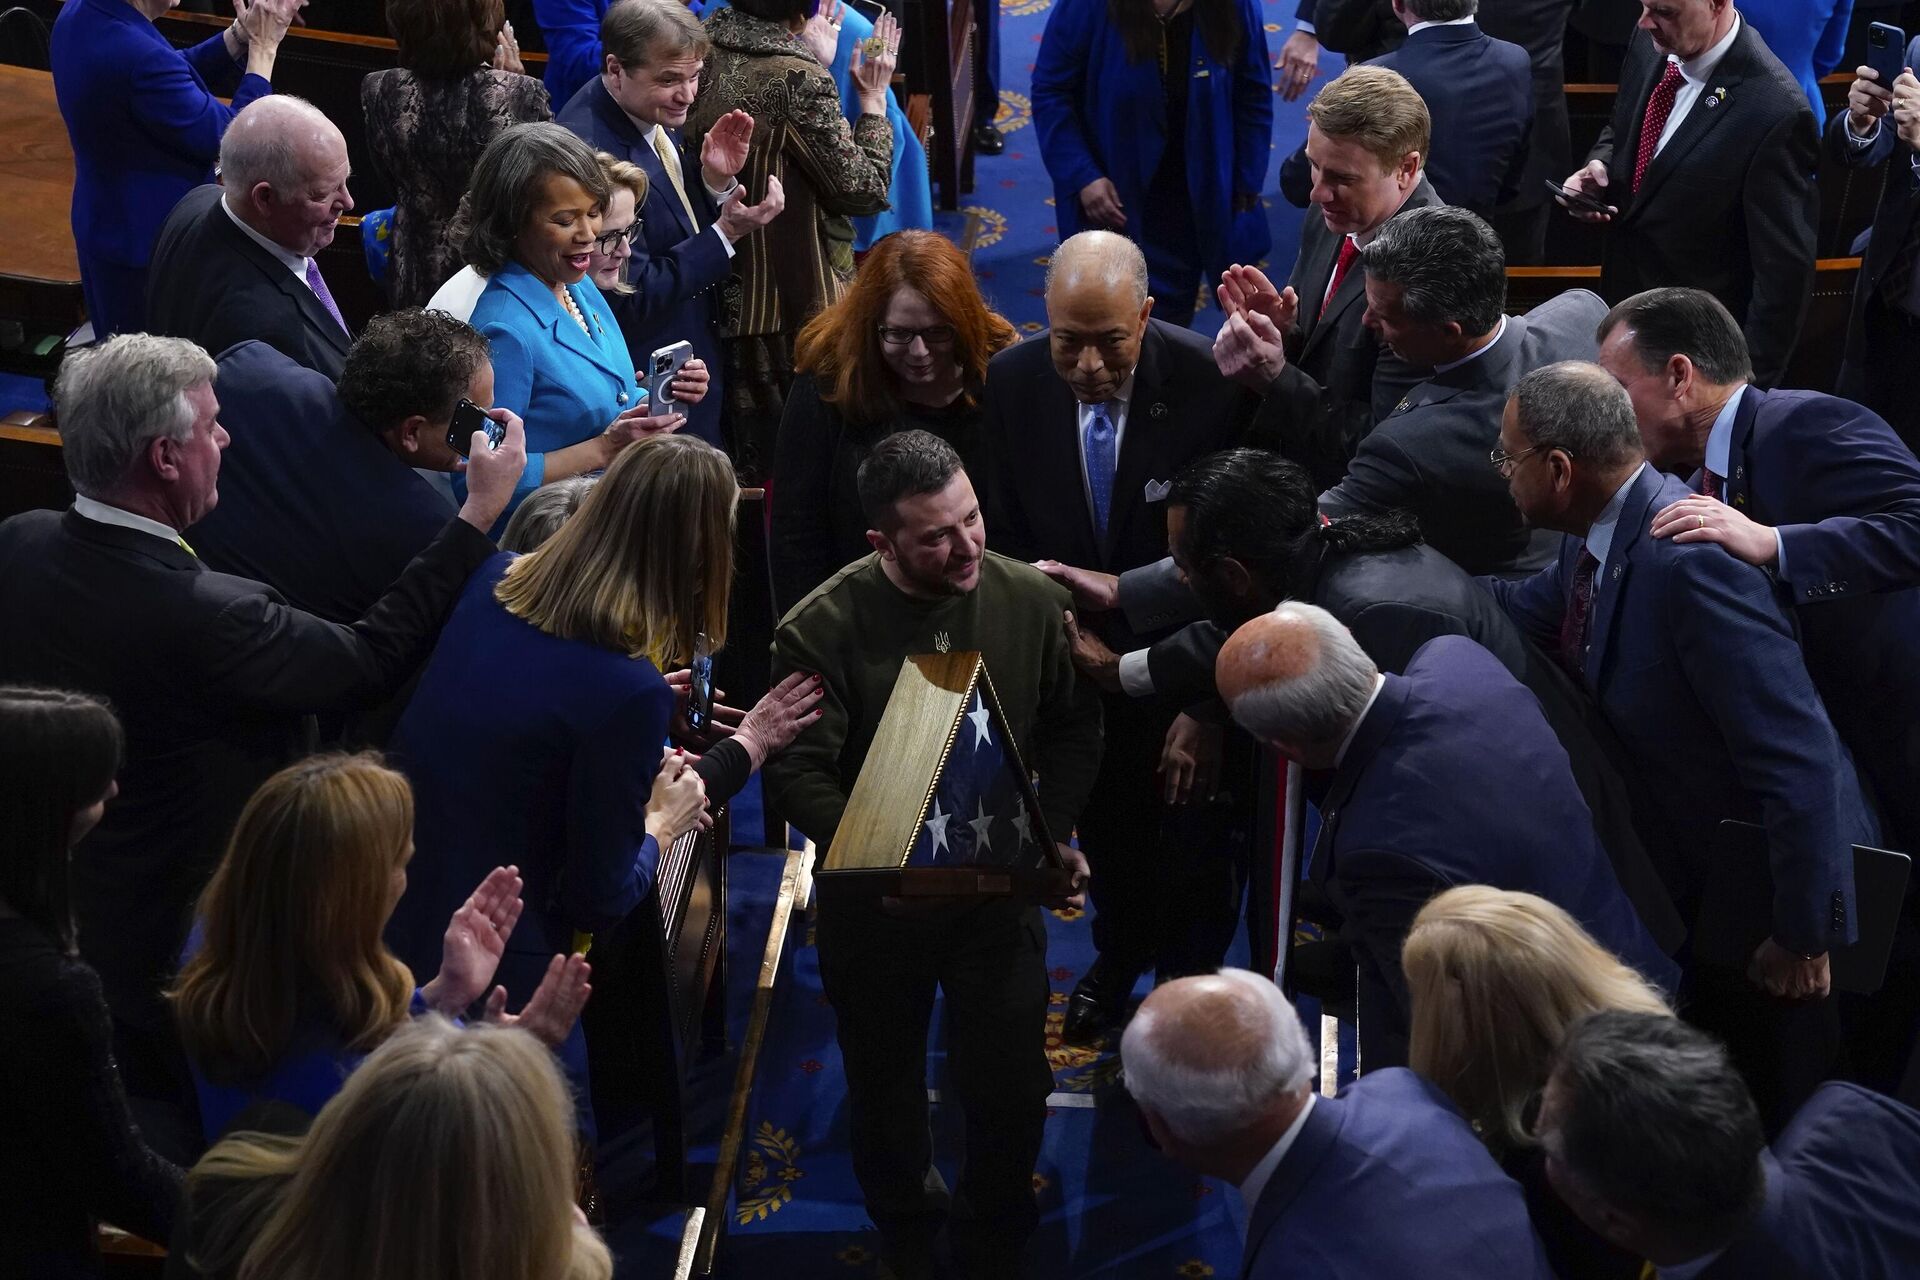 Ukrainian President Volodymyr Zelenskyy holds an American flag that was gifted to him by House Speaker Nancy Pelosi of Calif., as he leaves after addressing a joint meeting of Congress on Capitol Hill in Washington, Wednesday, Dec. 21, 2022. - Sputnik International, 1920, 26.01.2023